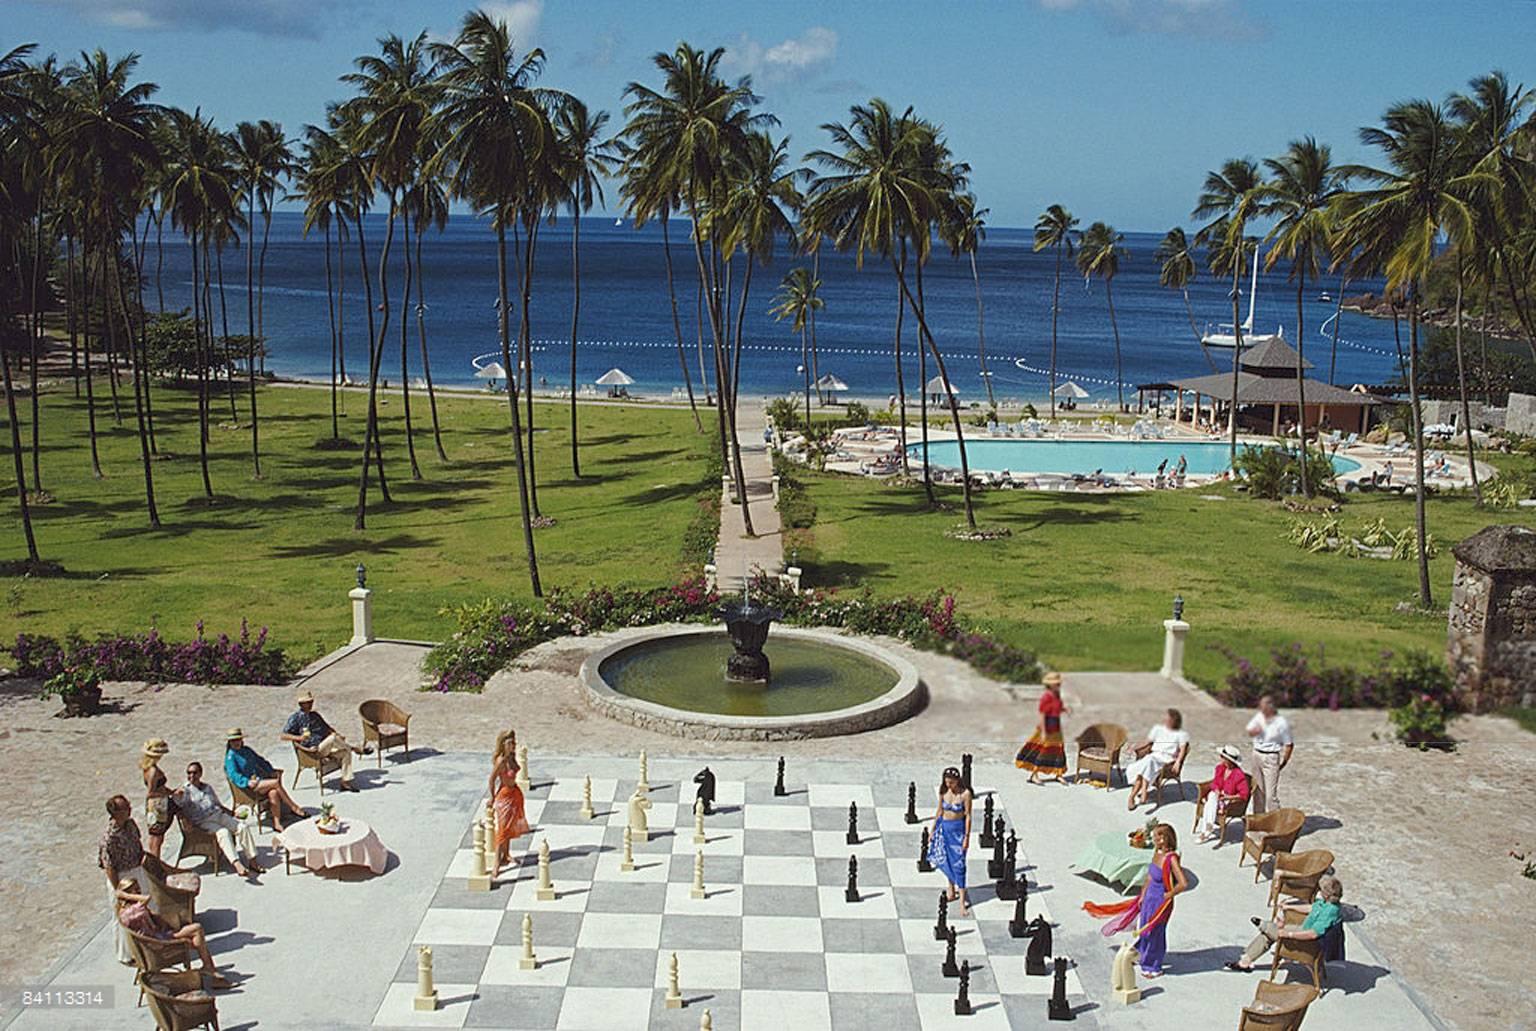 A giant game of chess in Saint Lucia, in the Lesser Antilles, February 1993. 

40 x 60 inches
$3950

30 x 40 inches
$3350

20 x 30 inches
$3000

Estate stamped and hand numbered edition of 150 with certificate of authenticity from the estate.